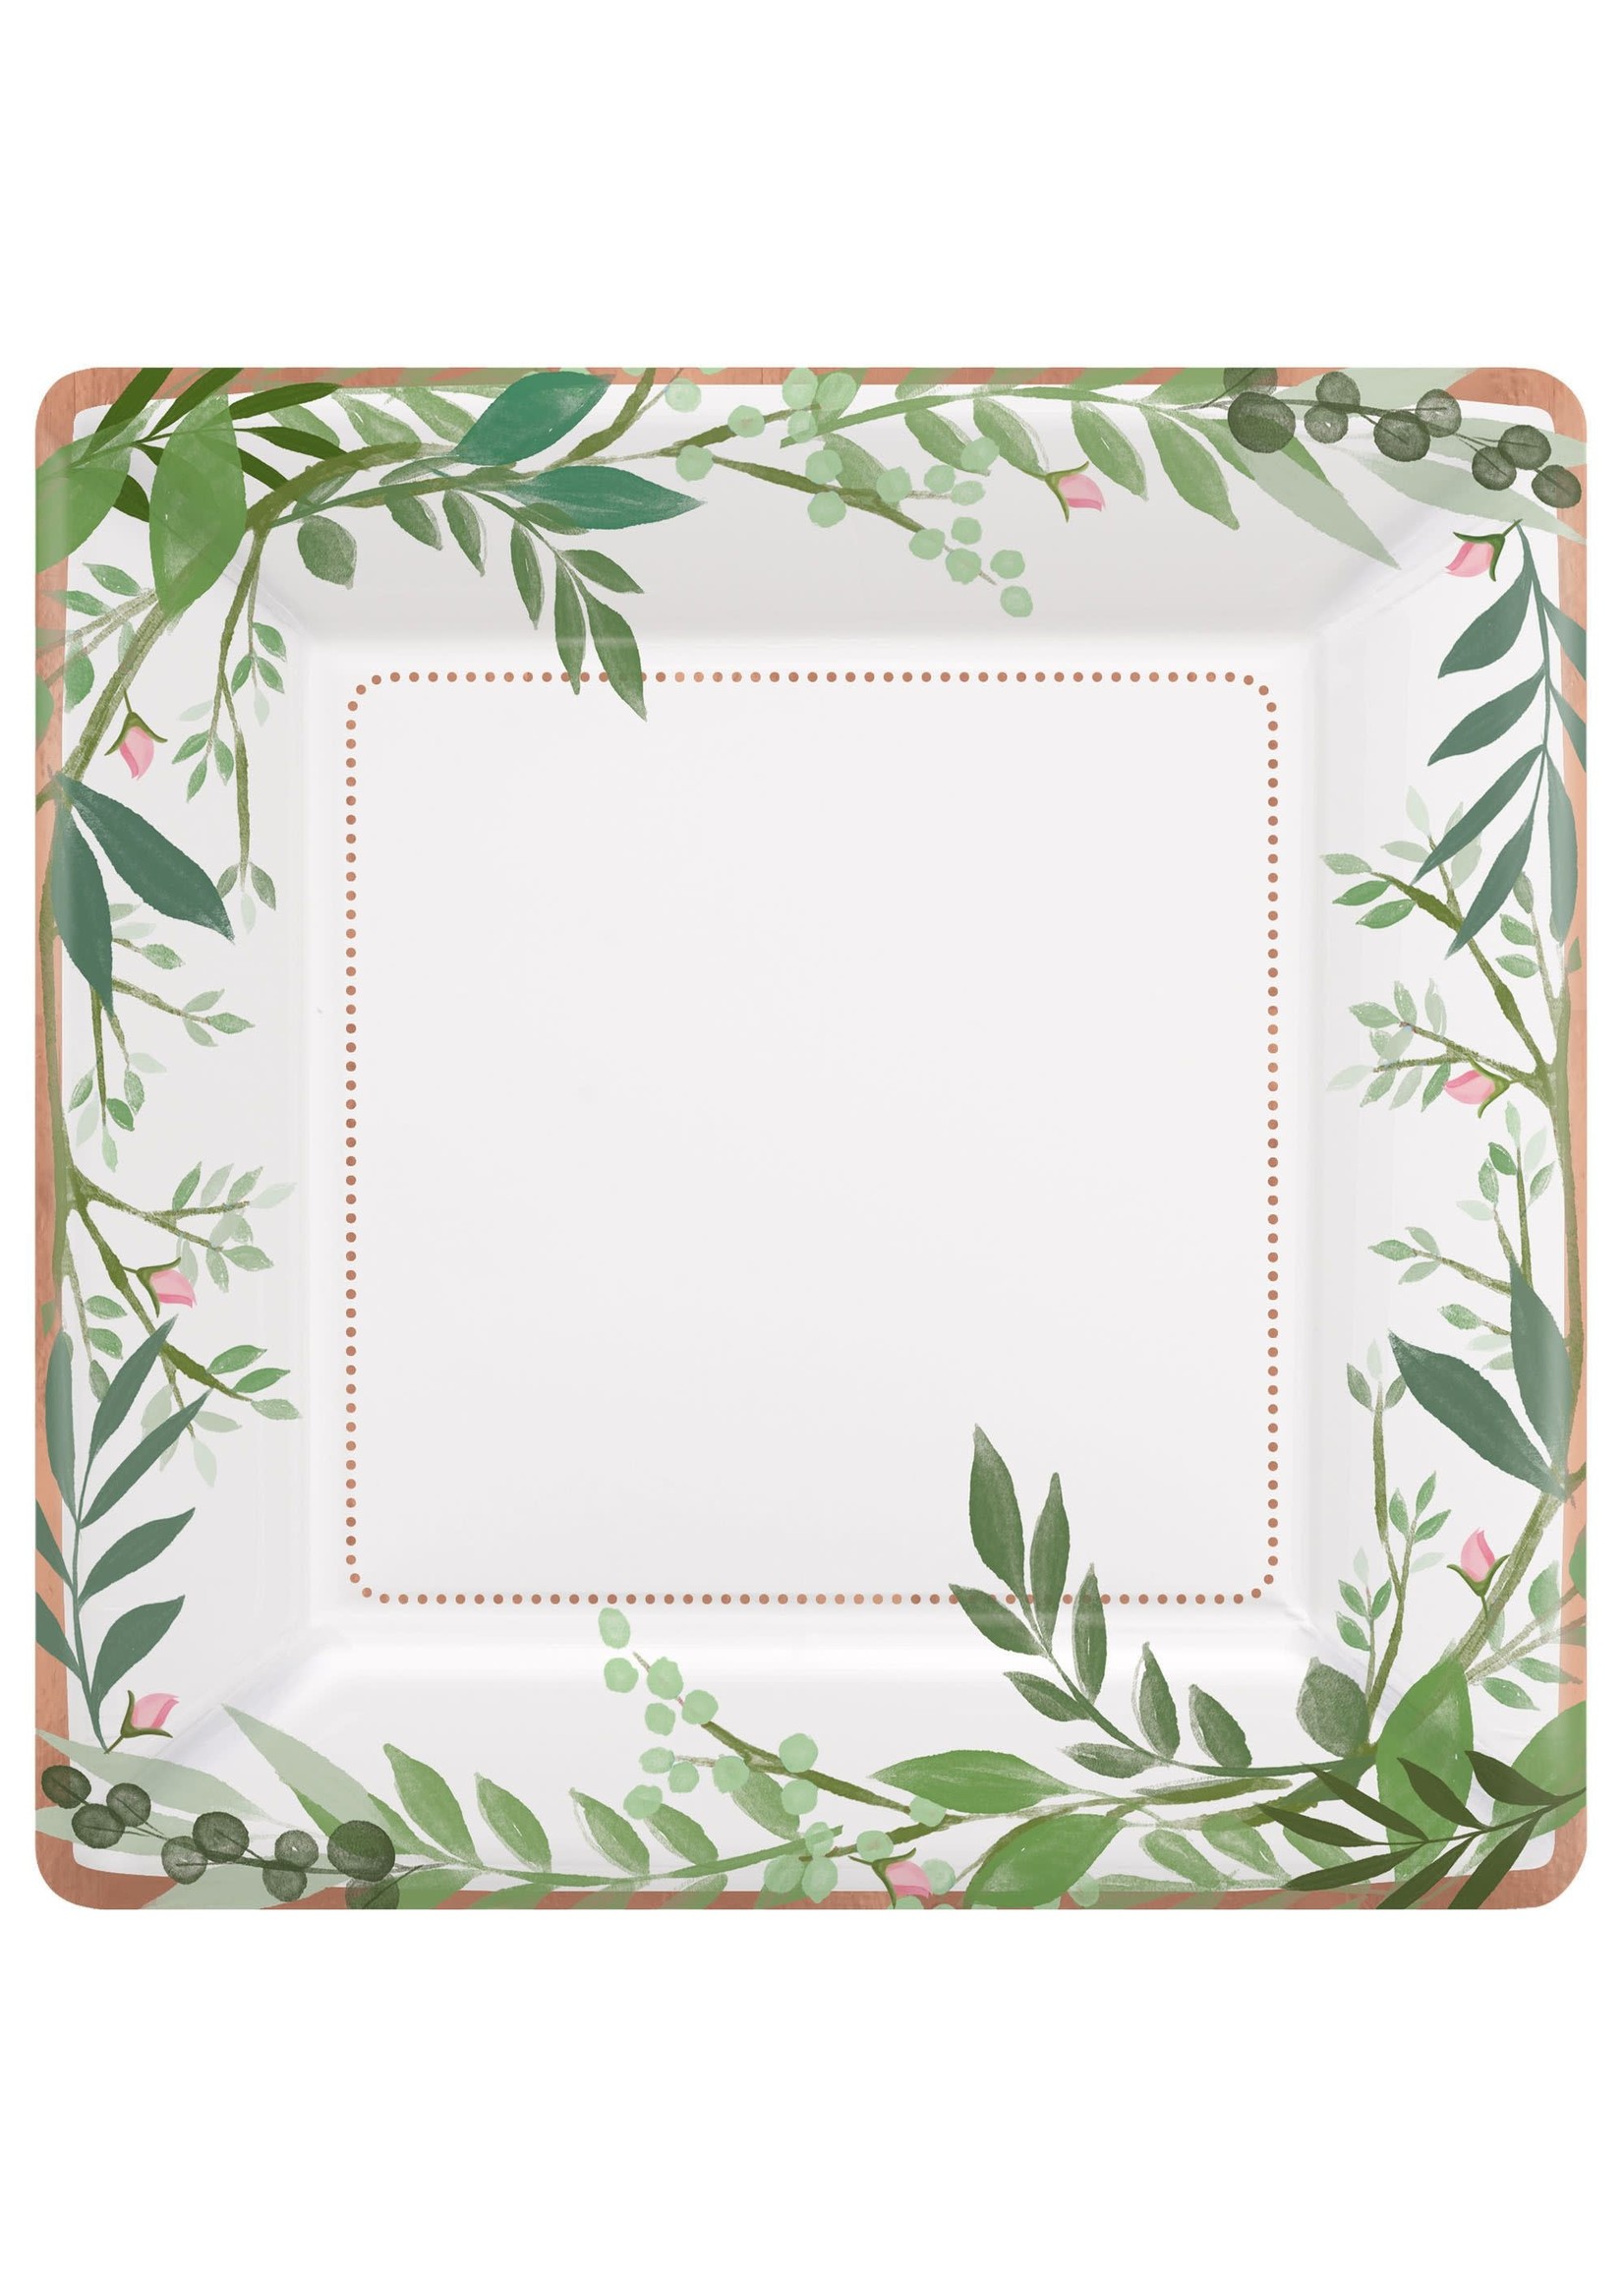 Love and Leaves Dinner Plates - 8ct